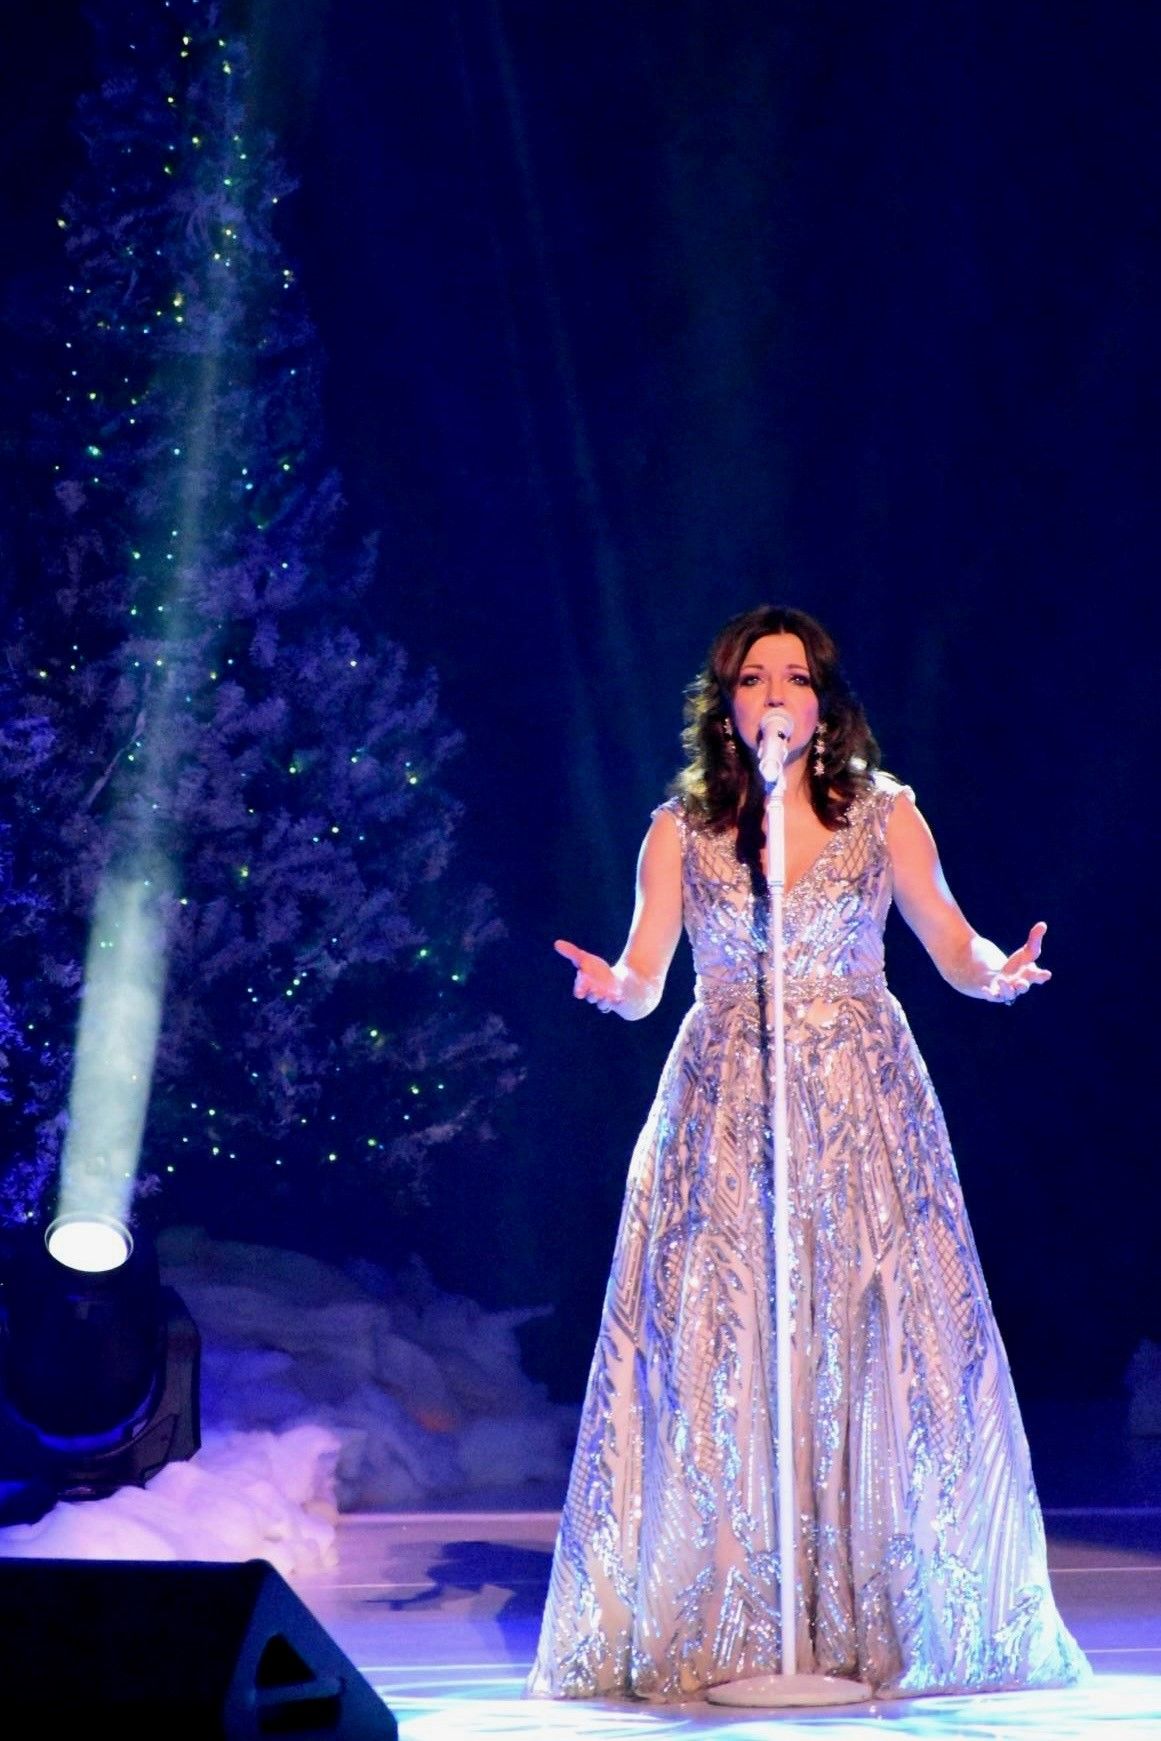 MARTINA McBRIDE CONTINUES TO BRING THE HOLIDAY CHEER THROUGH THE LAST